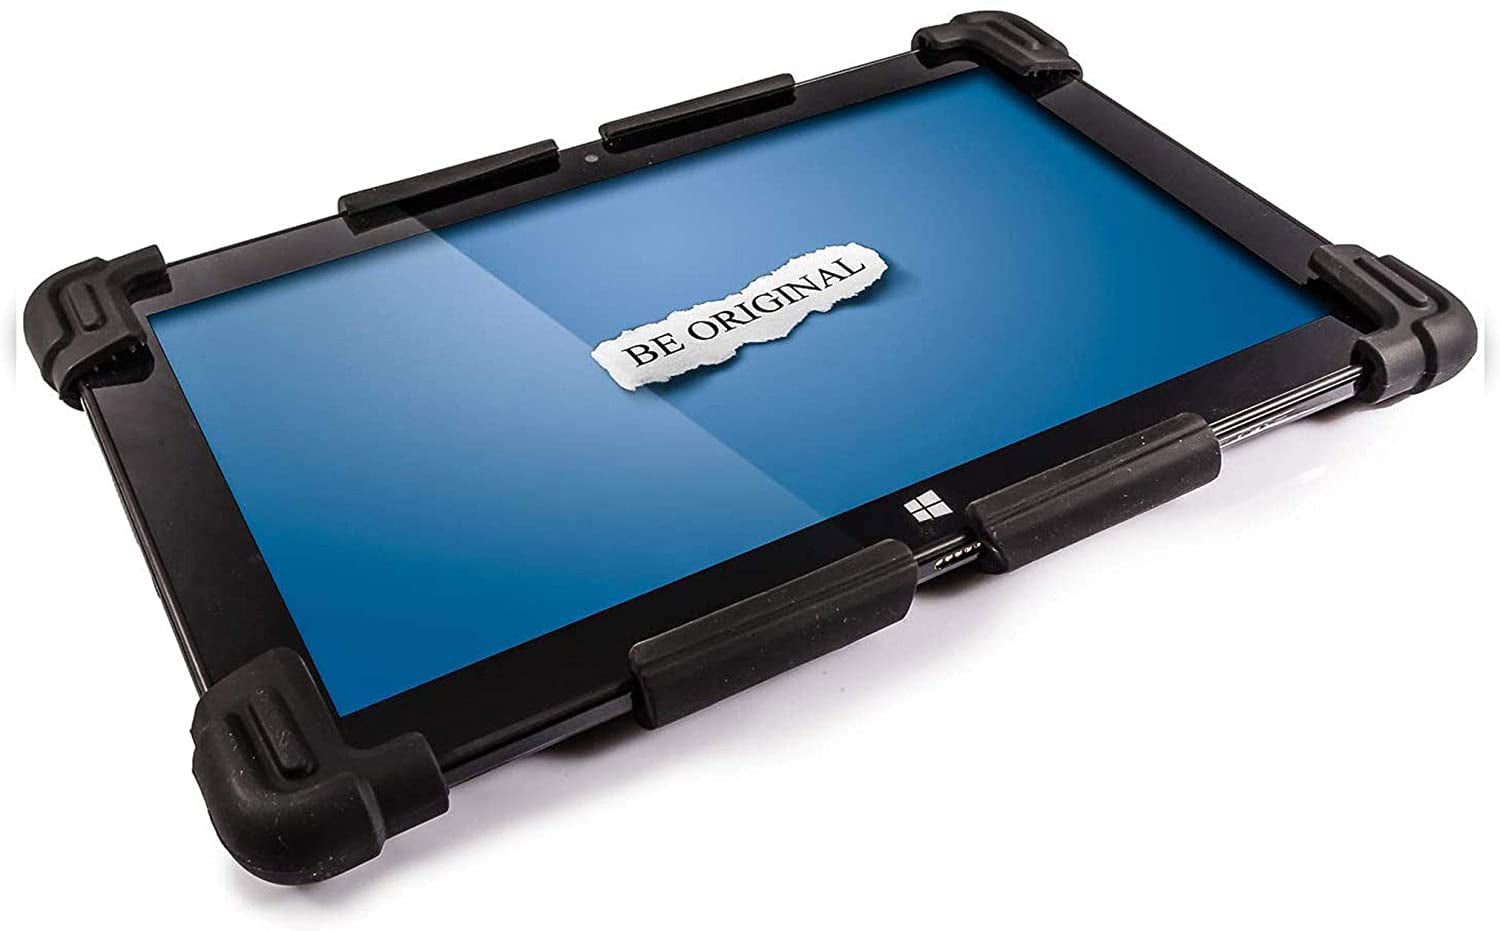 Universal Tablet PC Silicone Gel Case for 10" to 12.5" - Suitable for 10", 10.1", 10.6", 11.1", 11.6", 12" Tablet PCs (Black)